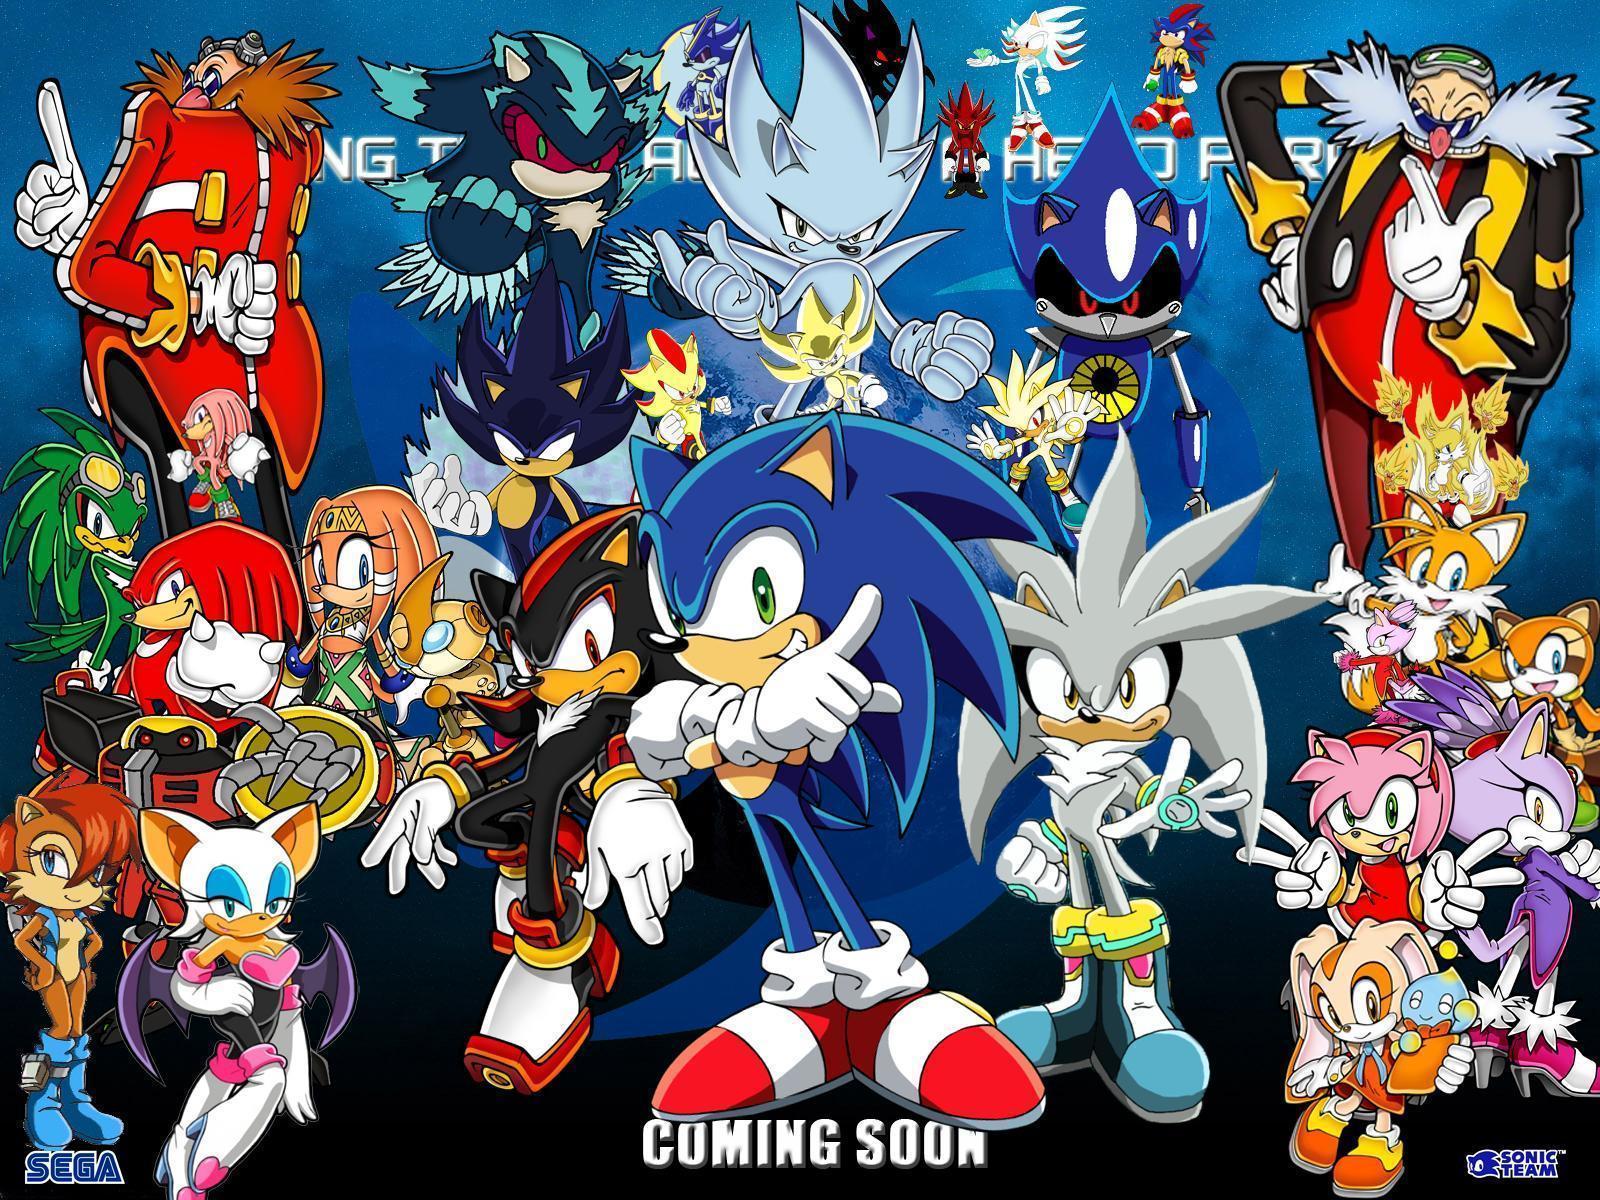 sonic x characters